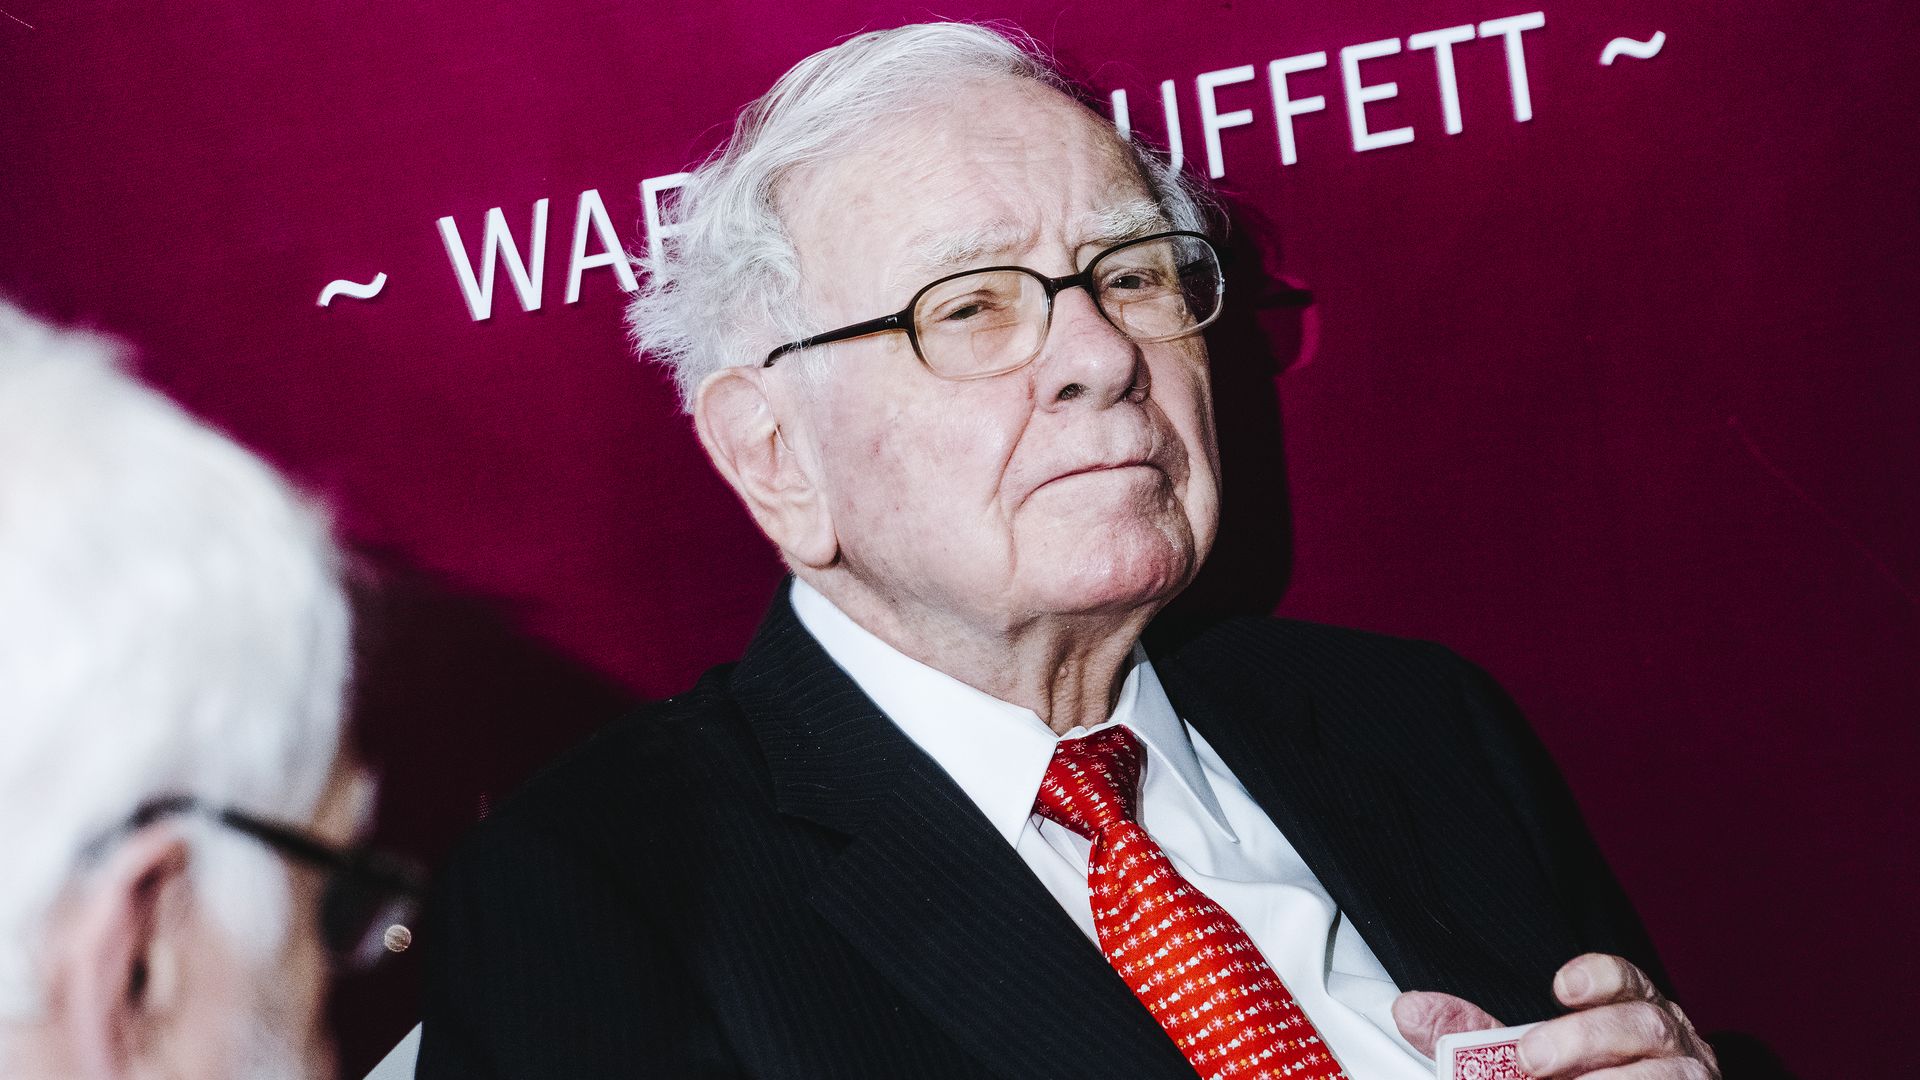 Warren Buffet sits while wearing a suit and tie 